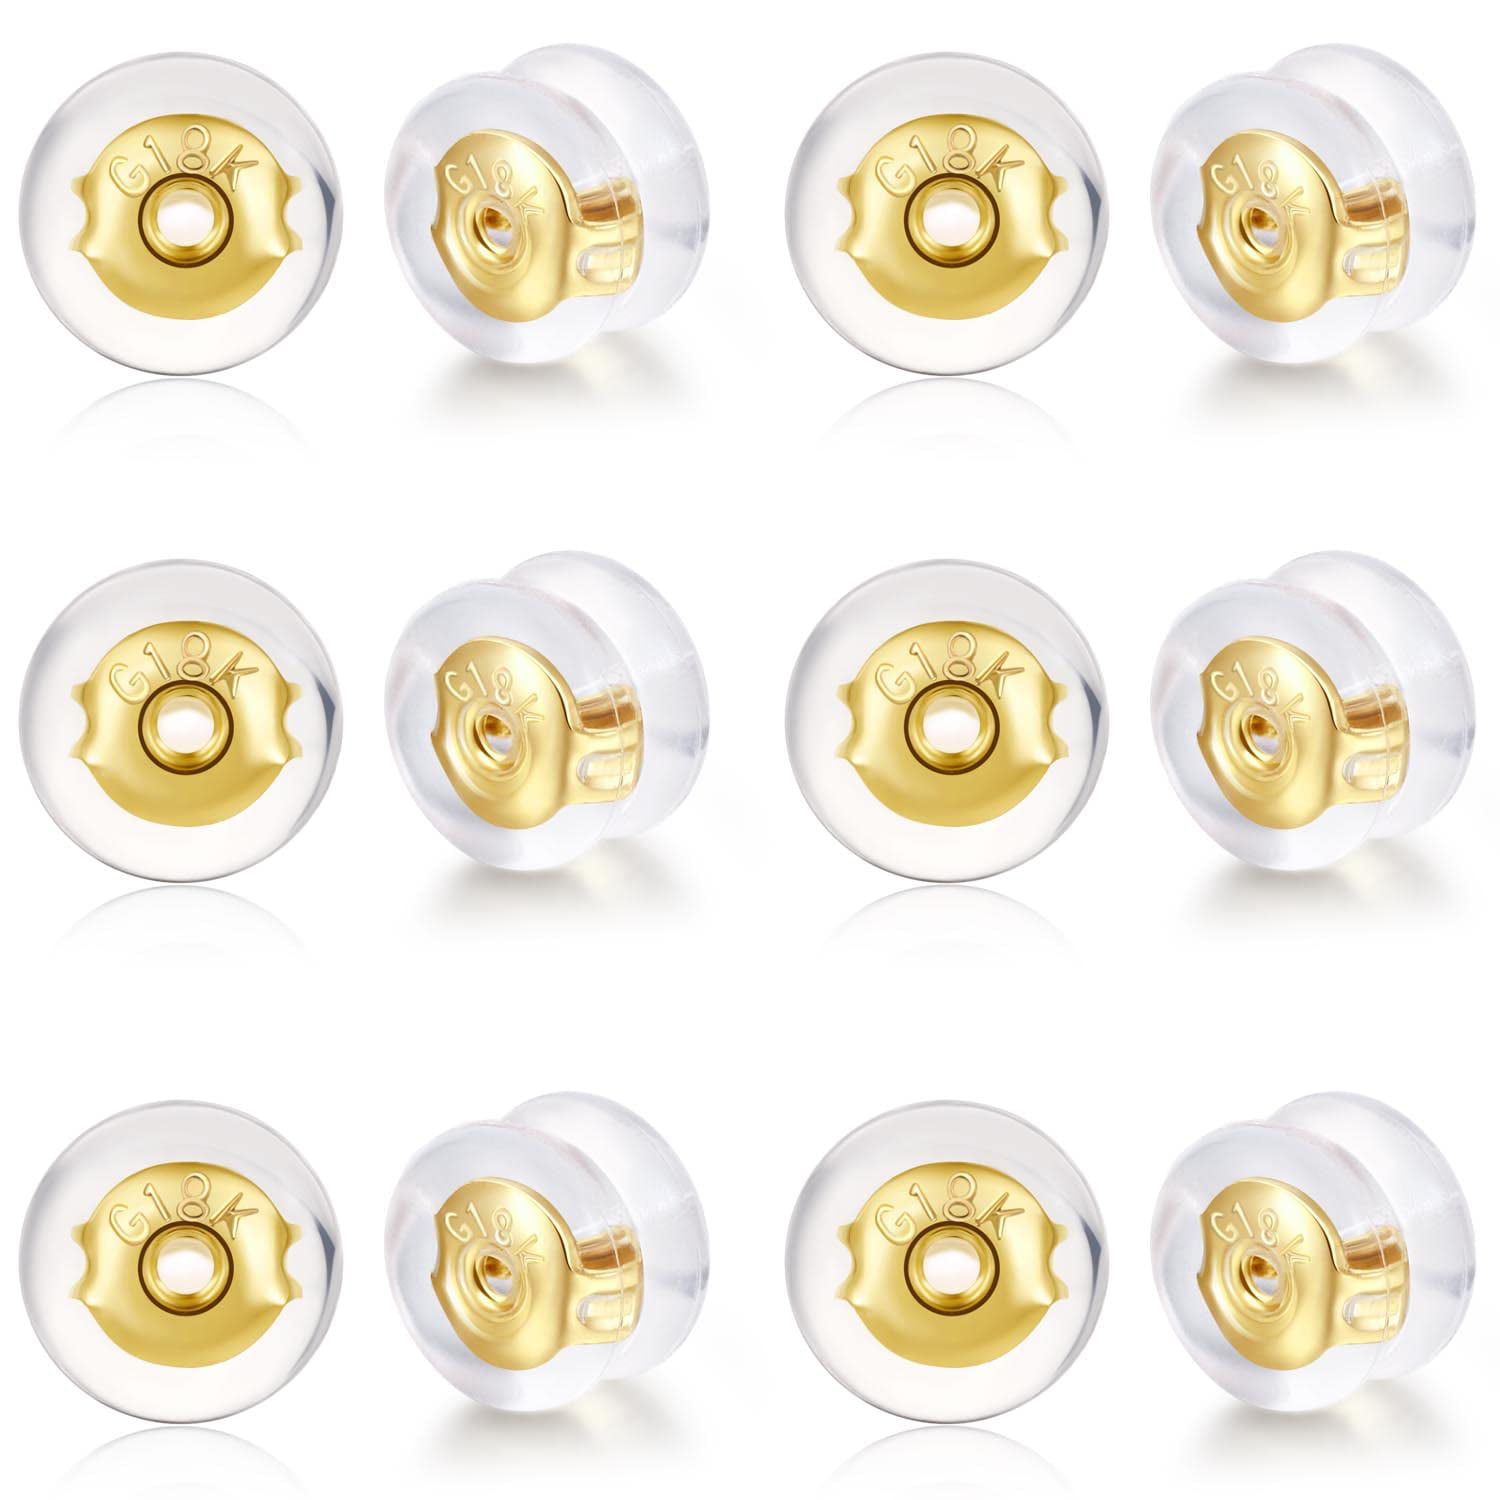 Earring Backs for Studs,925 Silver Silicone Earrings Back for Studs Secure,18K Gold Hypoallergenic Earring Backs Apply to Earring Backs for Droopy Ears（12Pcs/6Pairs） 